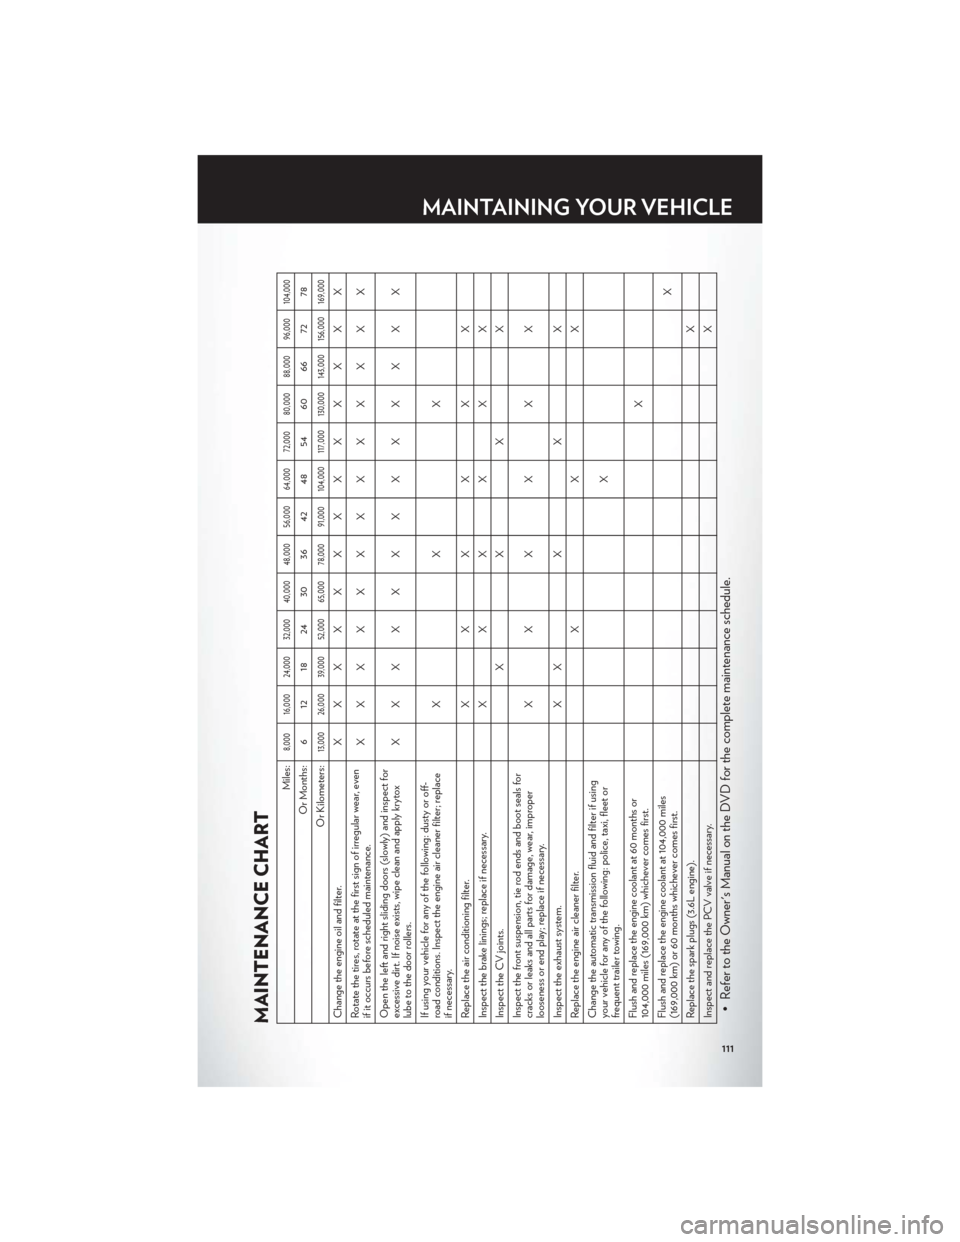 CHRYSLER TOWN AND COUNTRY 2012 5.G User Guide MAINTENANCE CHART
Miles:
8,000 16,000 24,000 32,000 40,000 48,000 56,000 64,000 72,000 80,000 88,000 96,000 104,000
Or Months: 6 12 18 24 30 36 42 48 54 60 66 72 78
Or Kilometers:
13,000 26,000 39,000